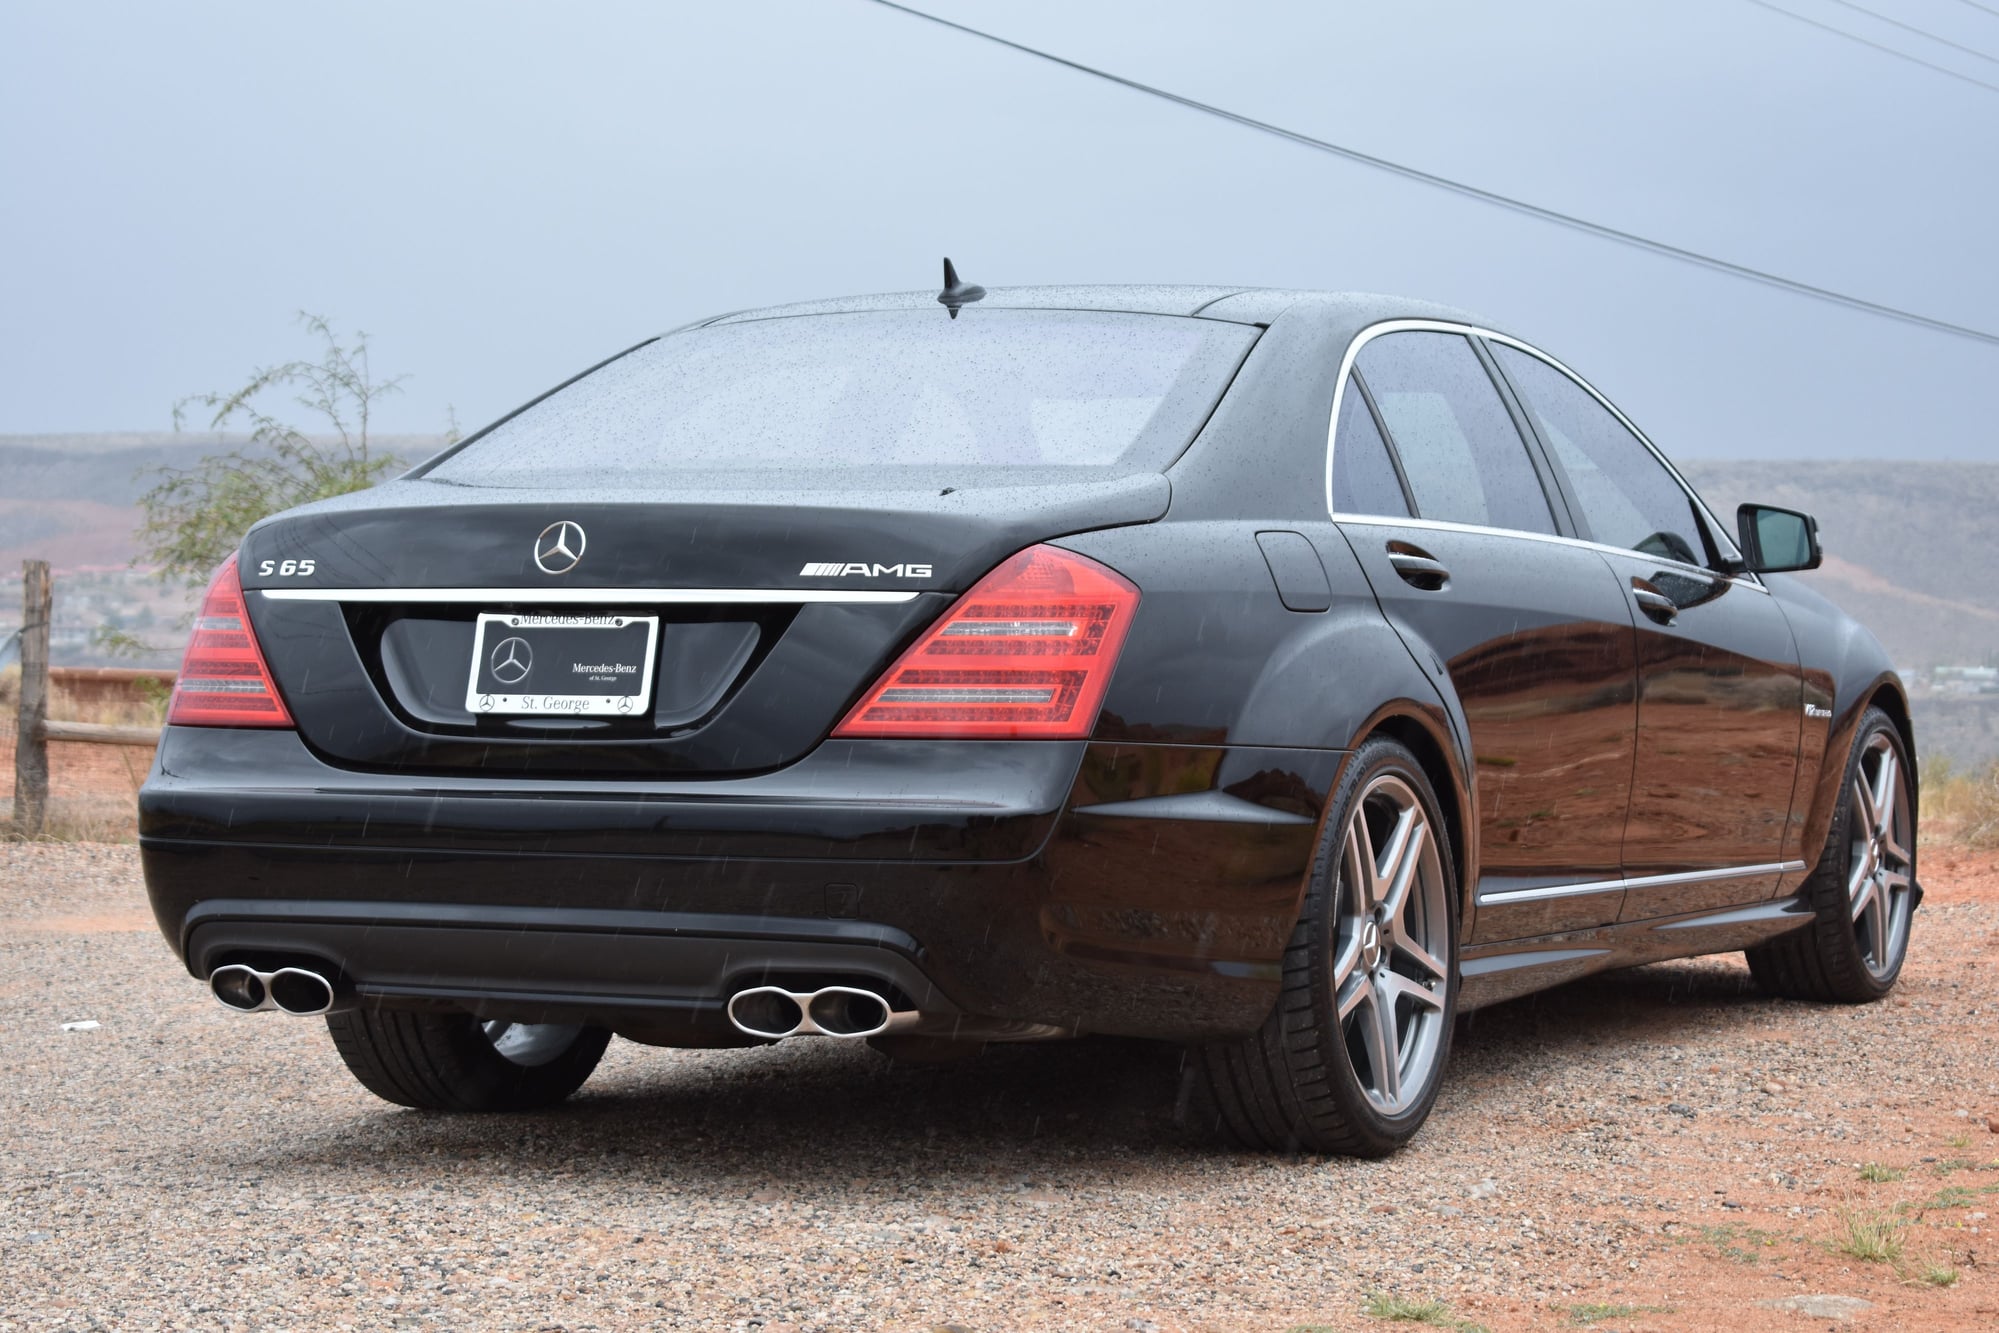 2007 Mercedes-Benz S65 AMG - 2007 Mercedes S65 AMG, immaculately well kept, lots of service records - Used - VIN WDDNG79X97A124434 - 115,000 Miles - 12 cyl - 2WD - Automatic - Sedan - Black - St. George, UT 84770, United States